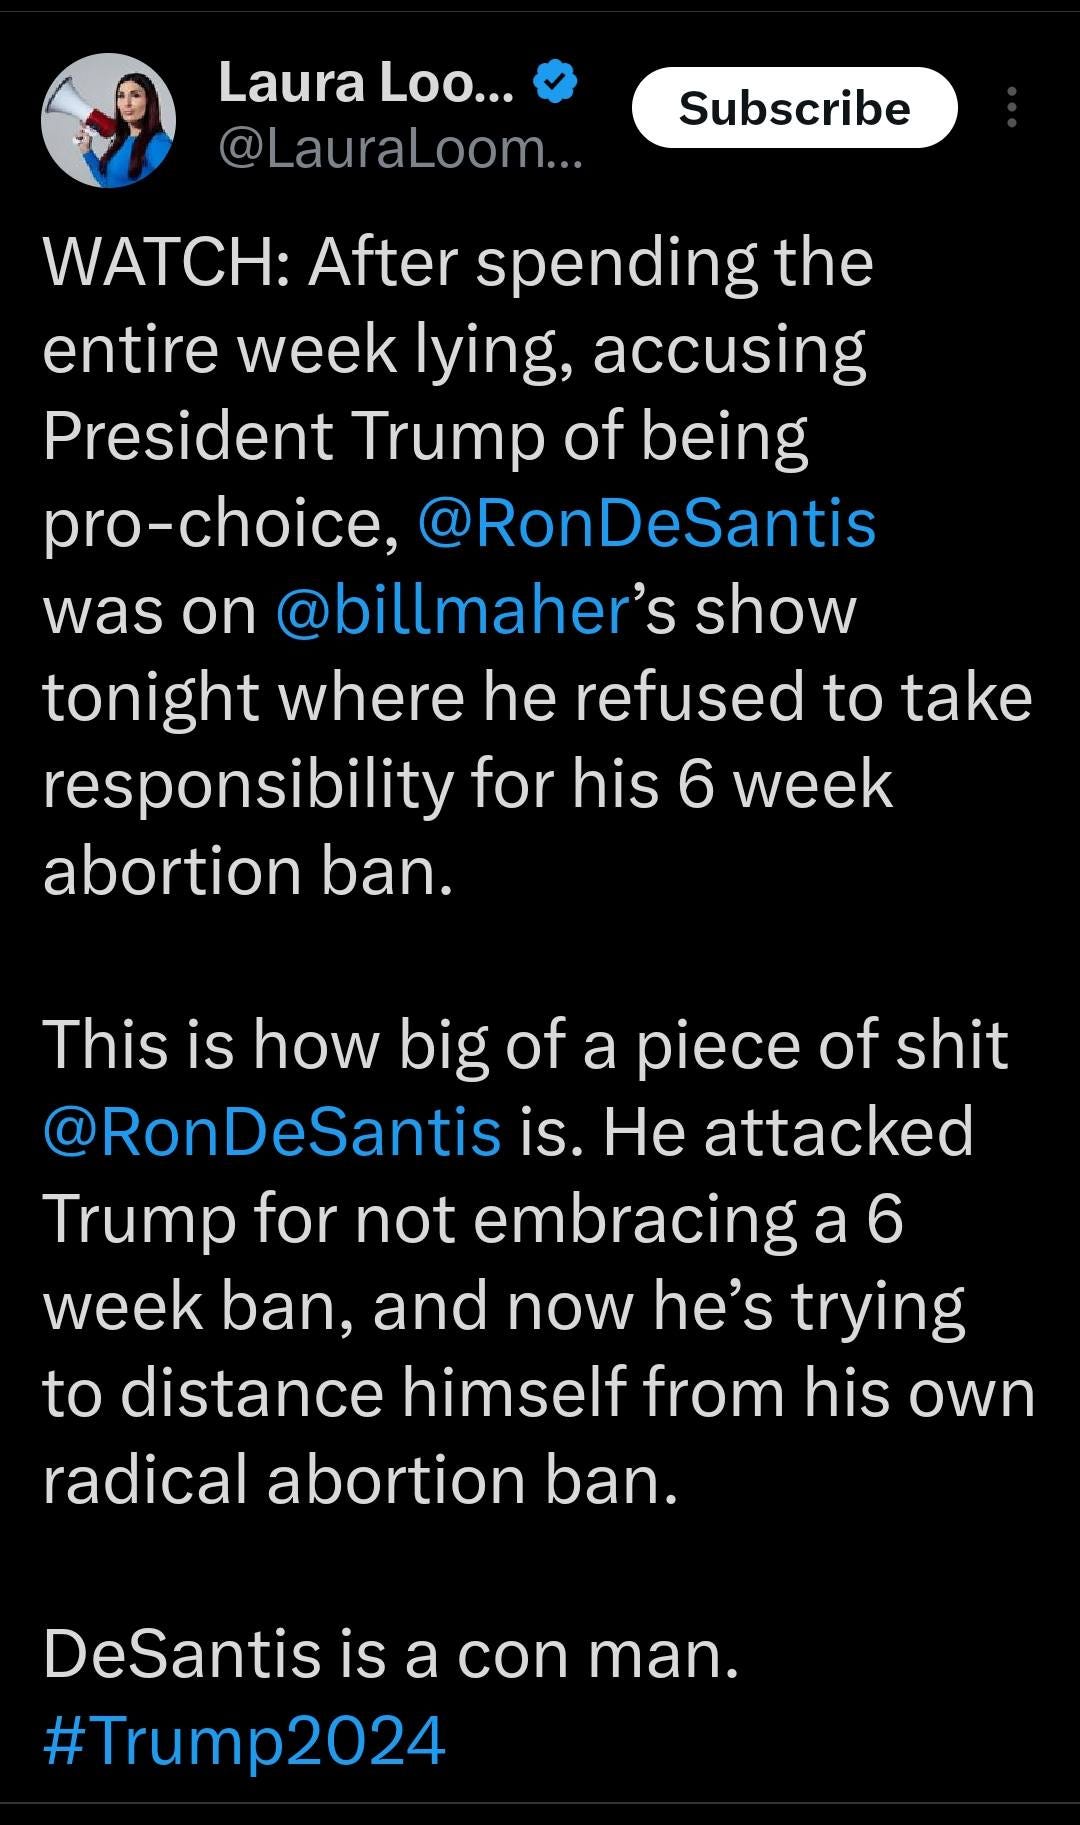 May be an image of text that says '11:54 MM 5G. 27% Post Laura Loo... @Lau aLoom Subscribe WATCH: After spending the entire week lying, accusing President Trump of being pro-choice, @RonDeSantis was on @billmaher's show tonight where he refused to take responsibility for his 6 week abortion ban. This is how big of piece of shit RonDeSantis is. He attacked Trump for not embracing a week ban, and now he's trying to distance himself from his own radical abortion ban. DeSantis is a con man. #Trump2024 Post your rep'